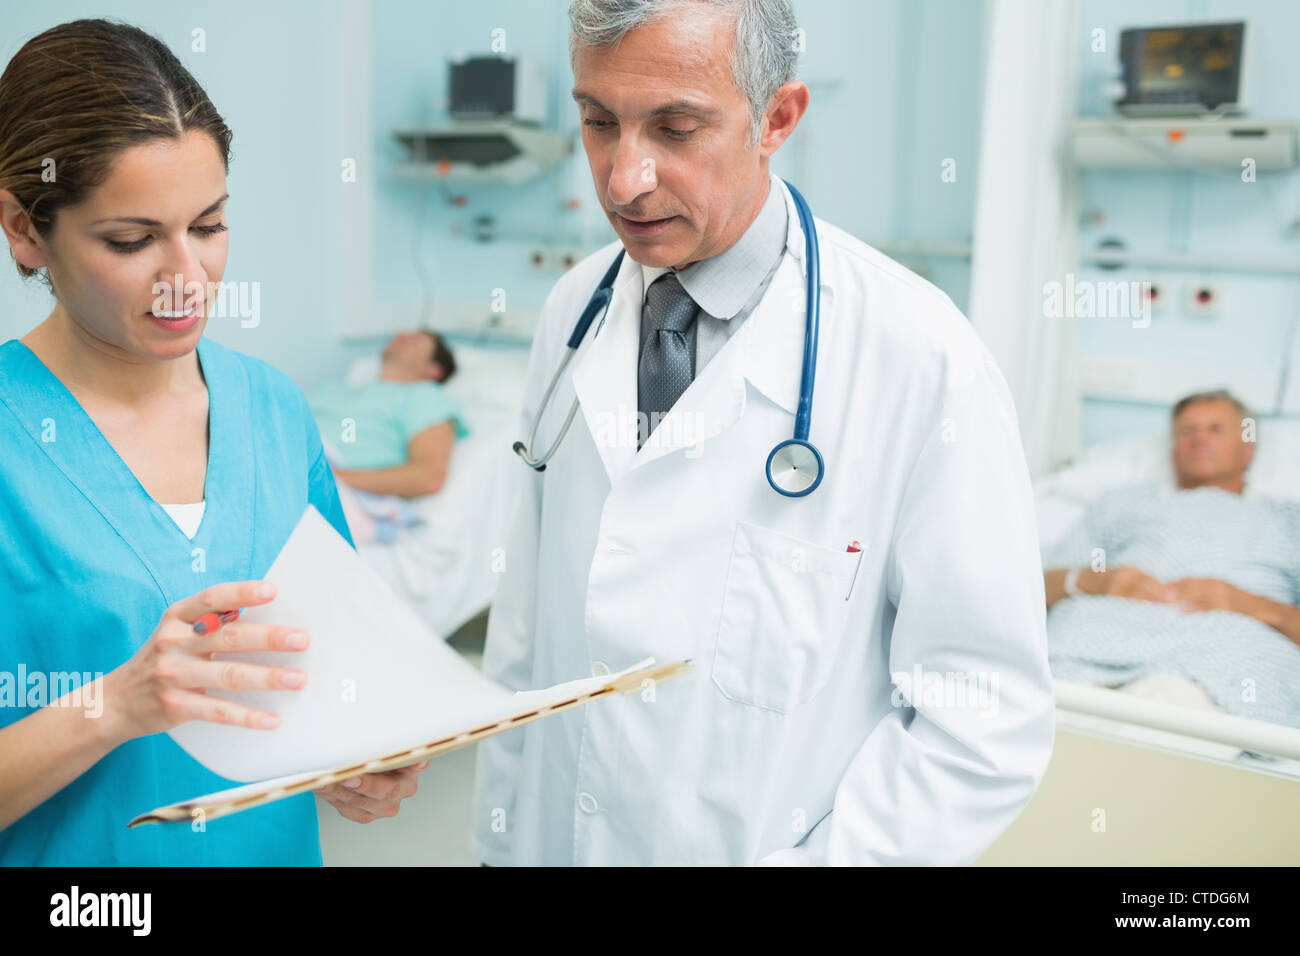 Smiling nurse and a doctor looking at chart in a hospital ward Stock Photo